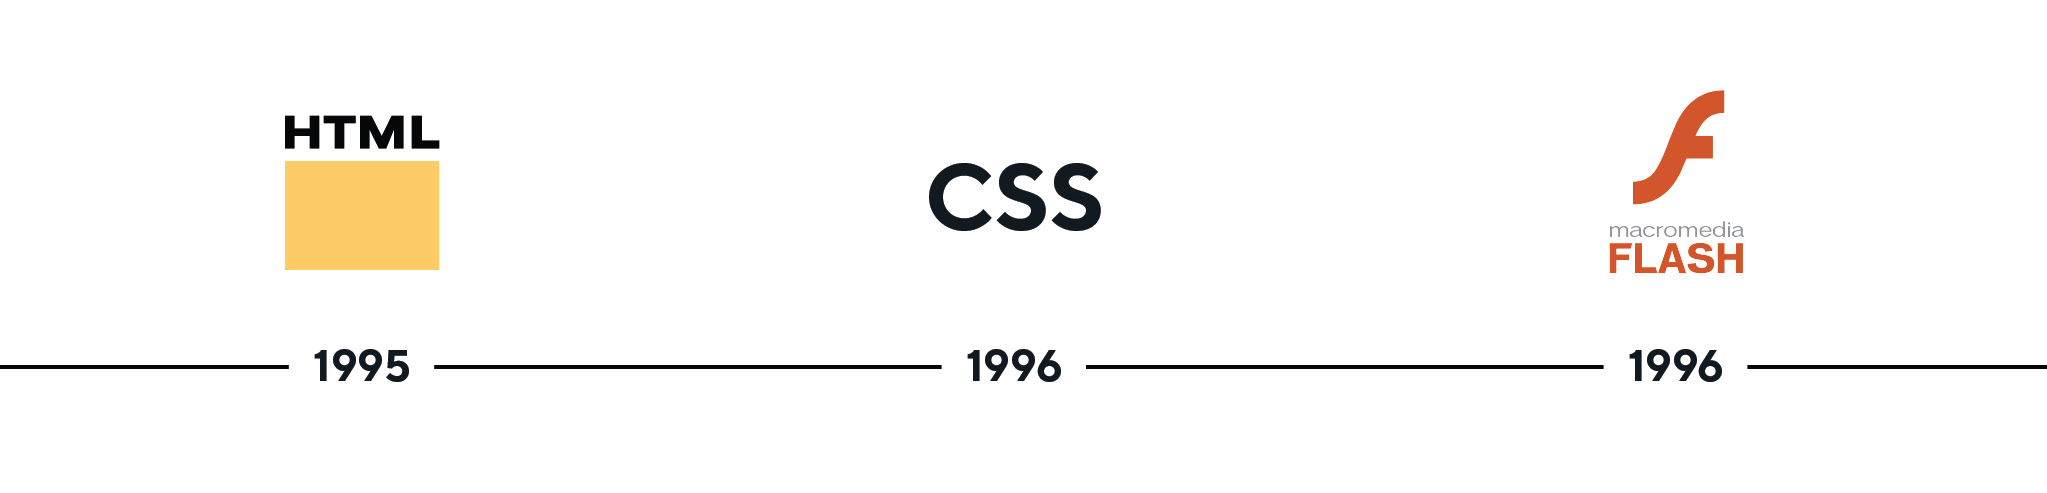 A timeline from 1995 - 1996 and transition from HTML to CSS to macromedia flash